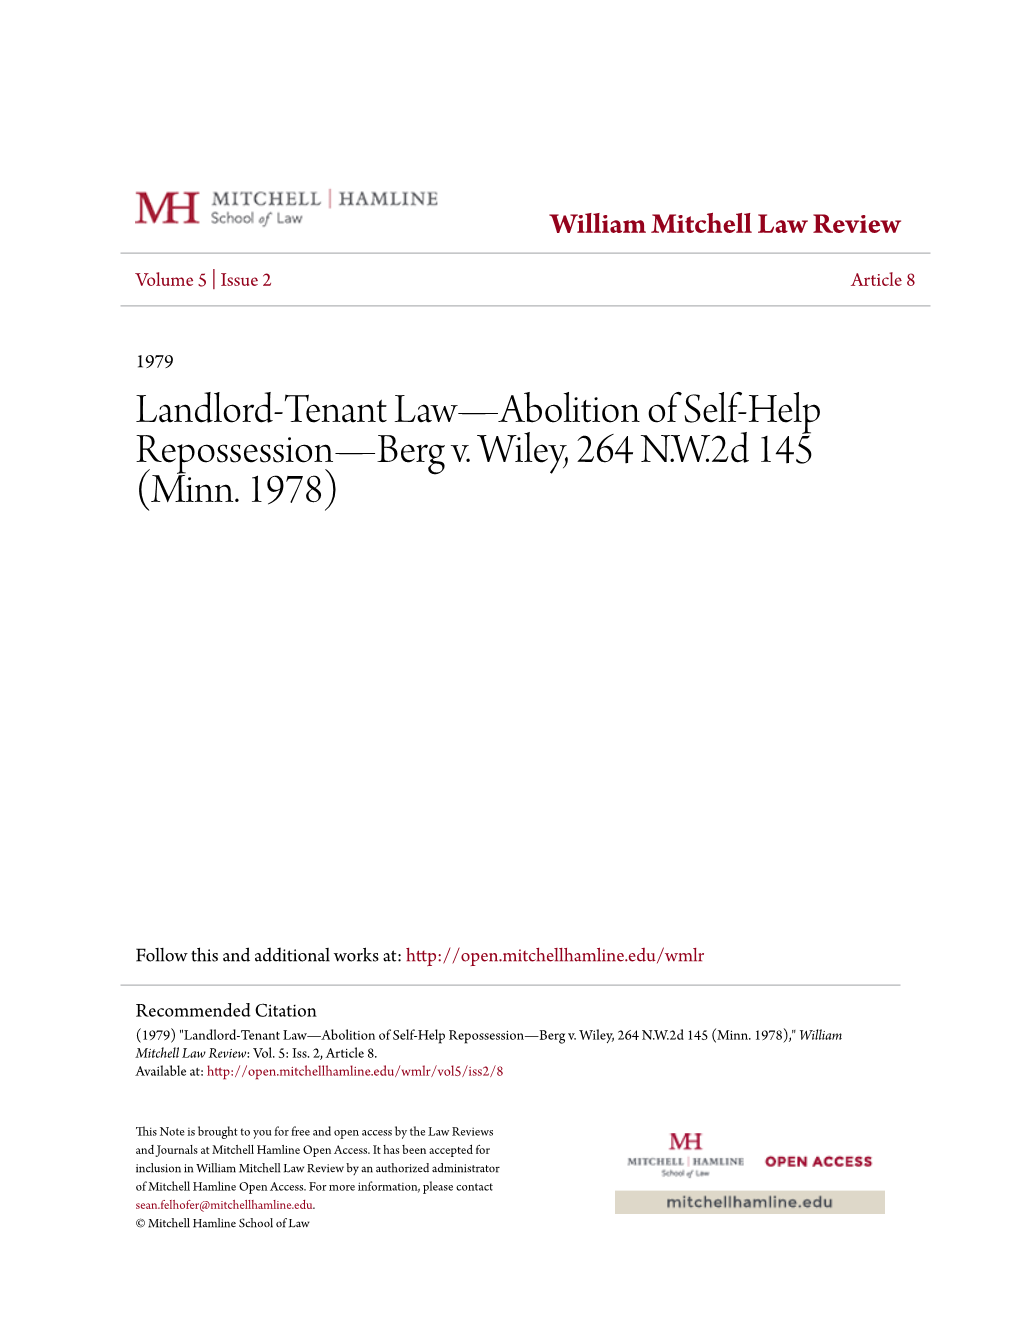 Landlord-Tenant Law—Abolition of Self-Help Repossession—Berg V. Wiley, 264 Nw2d